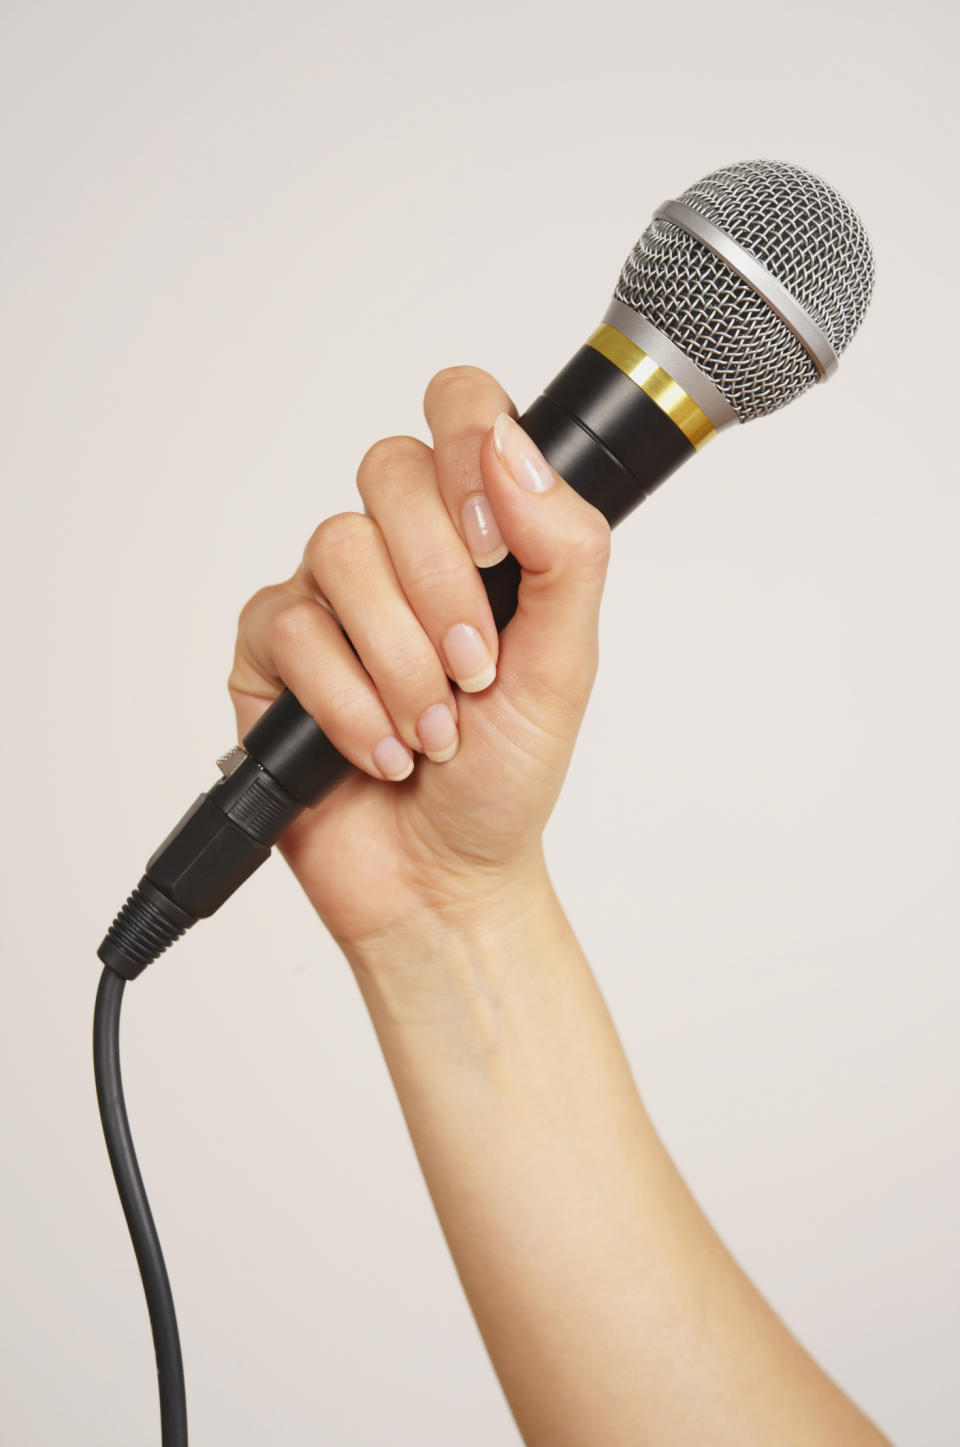 A hand holds a microphone, possibly preparing for a speech or interview